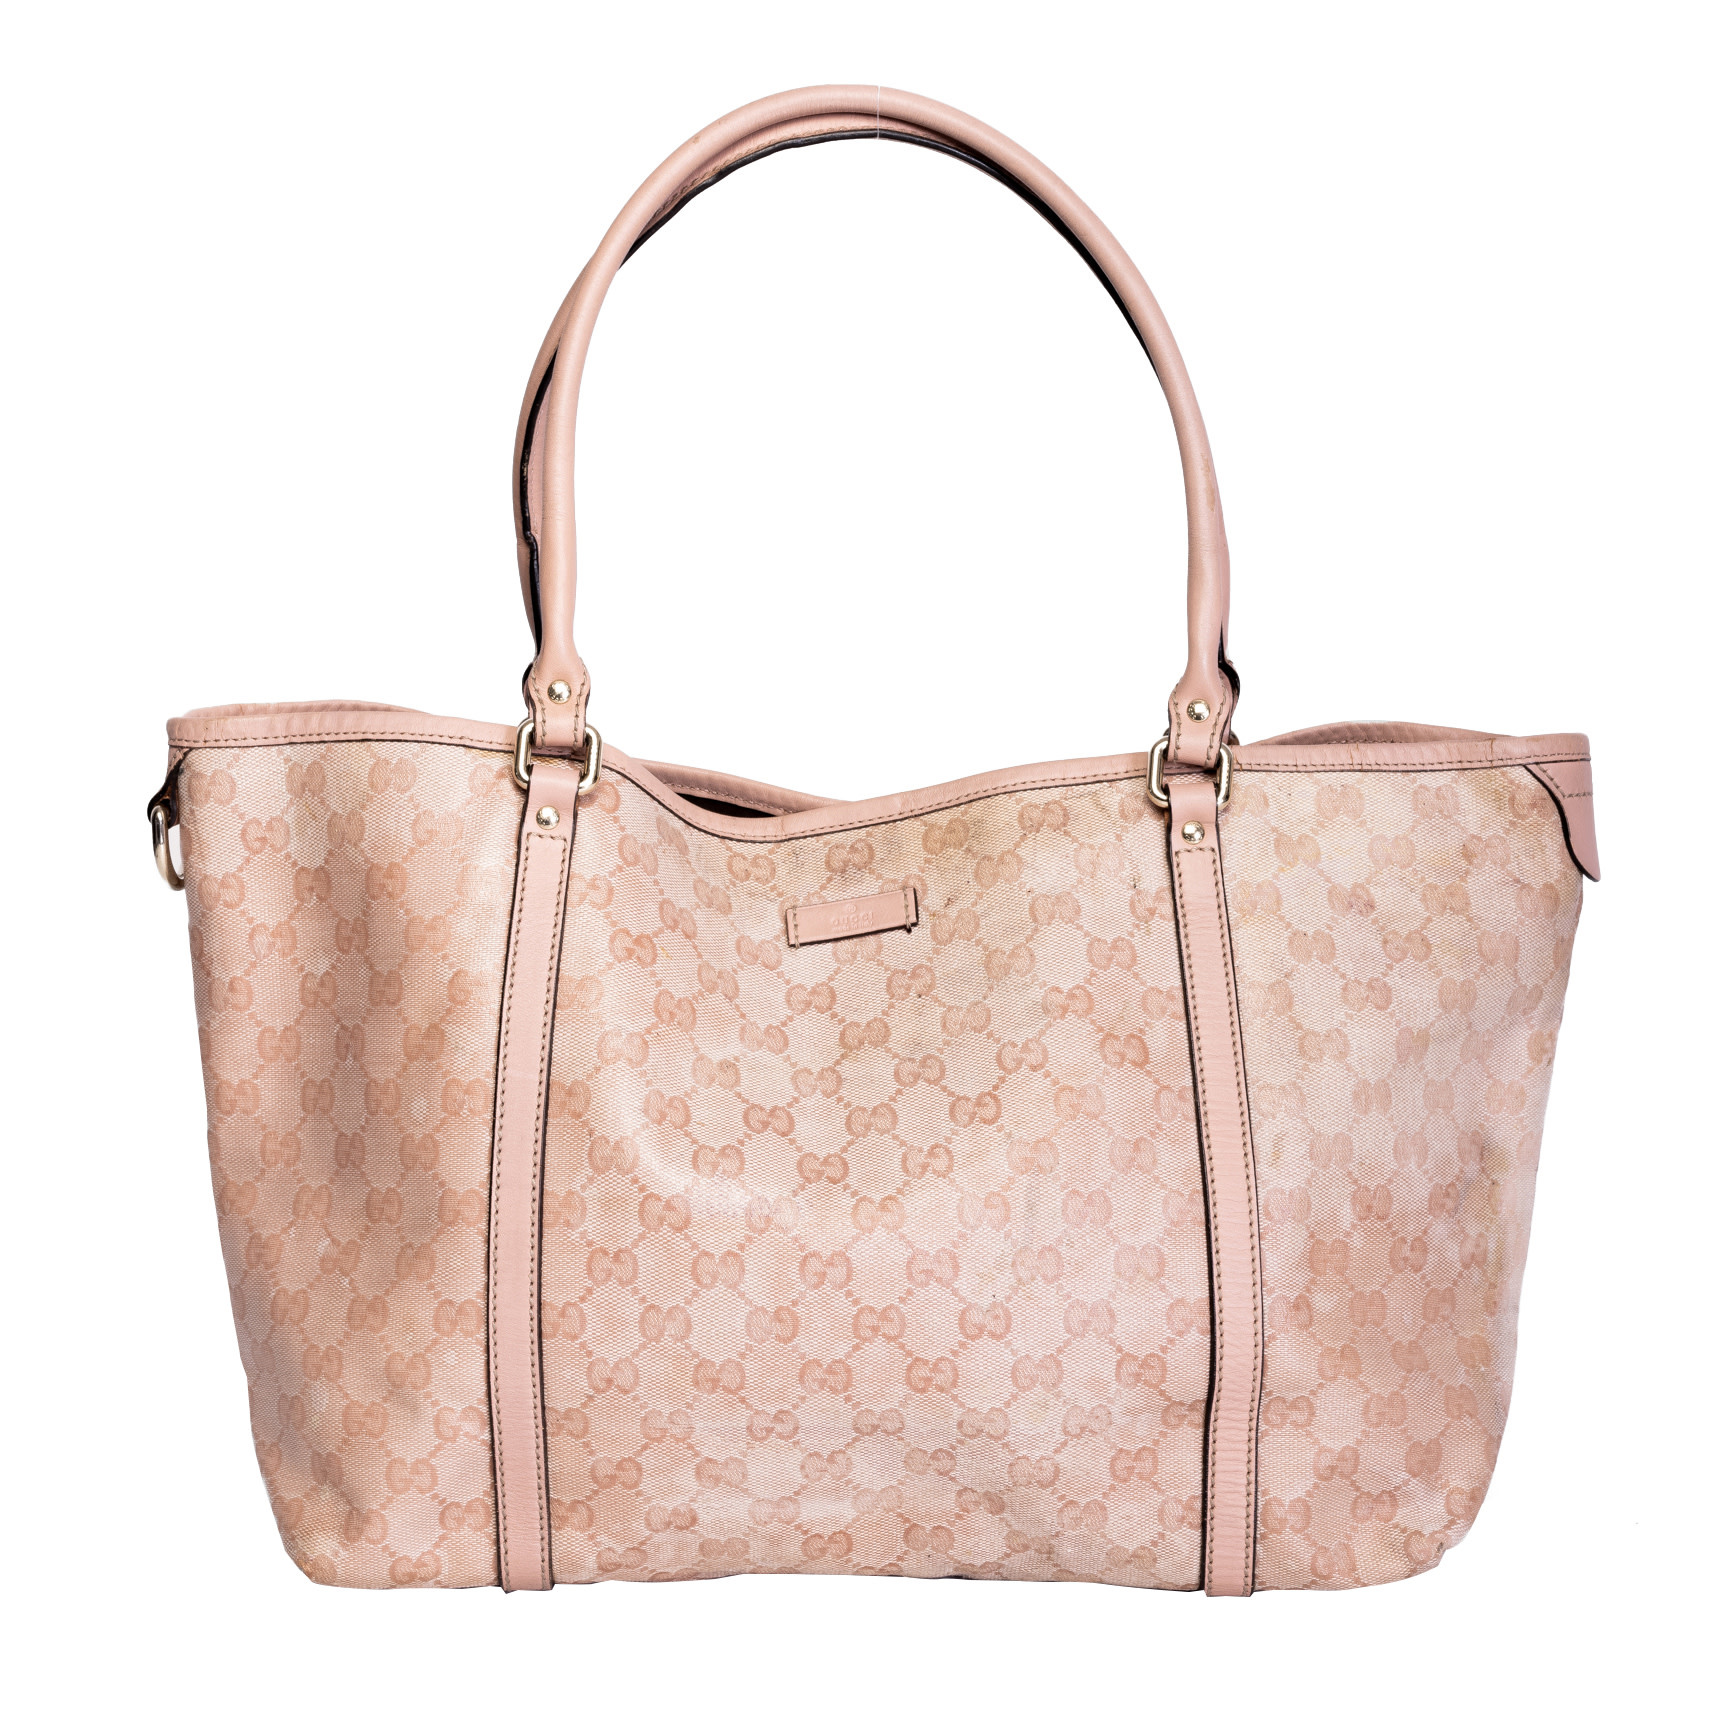 GUCCI GG mini leather-trimmed printed coated-canvas tote | NET-A-PORTER